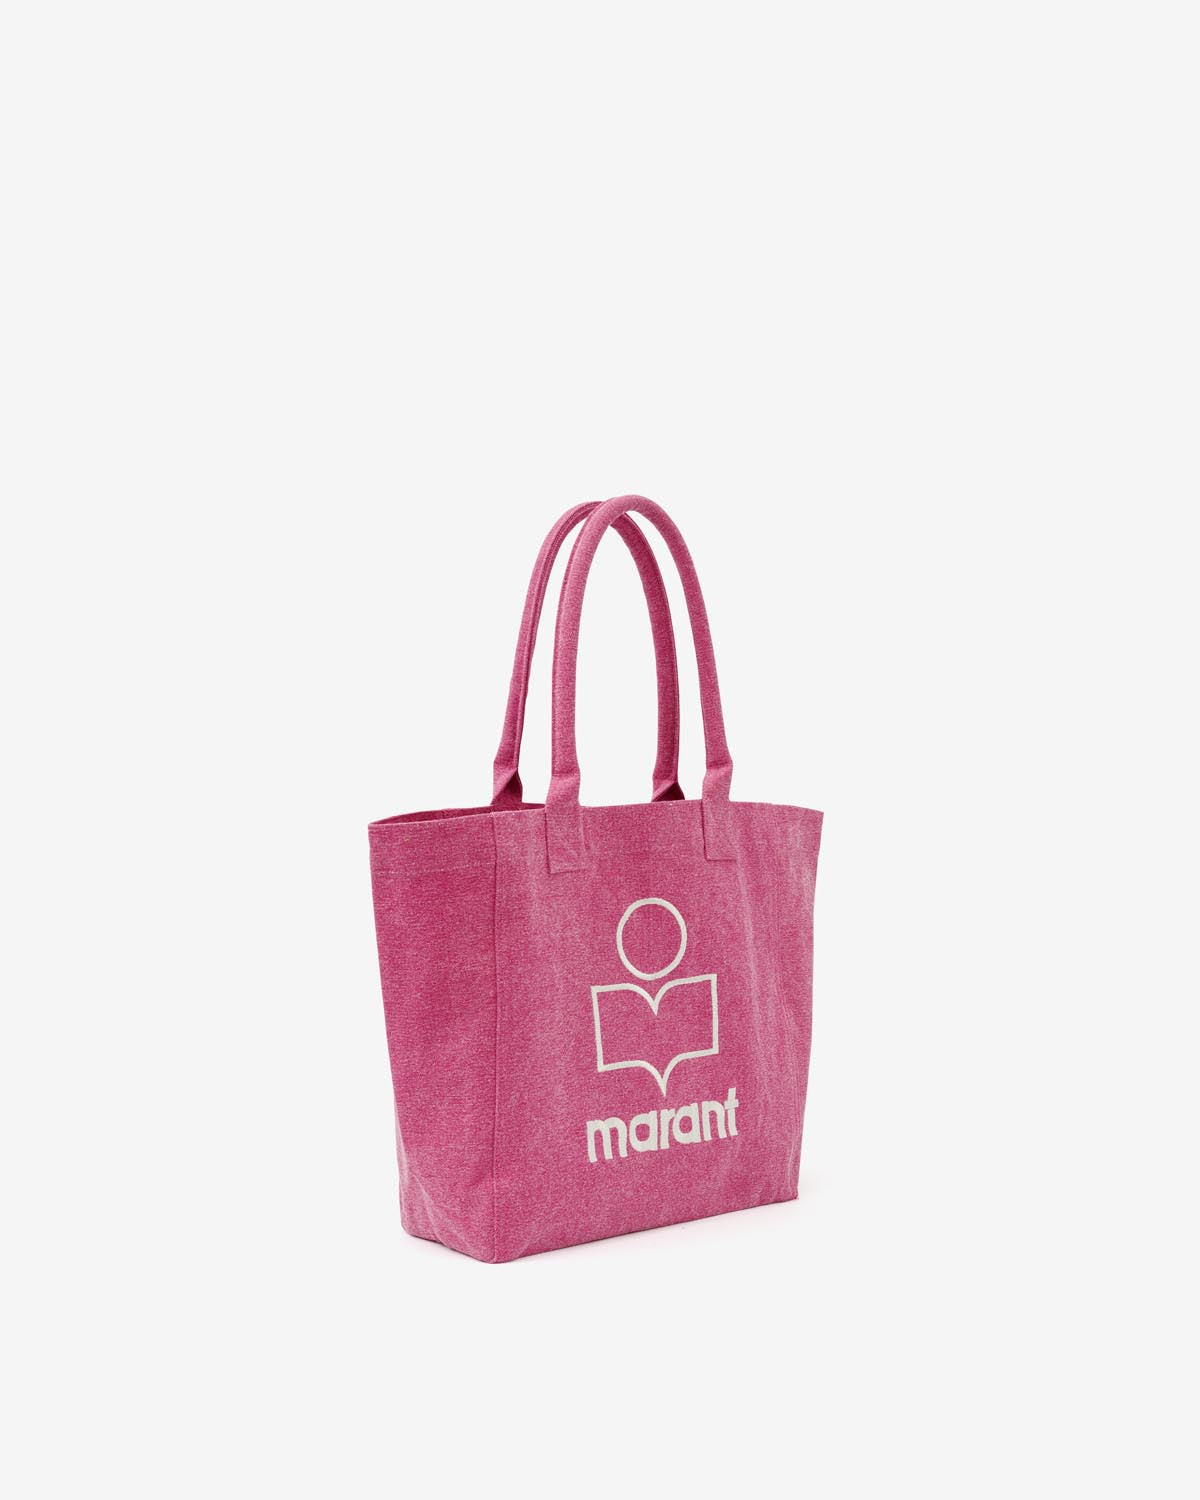 Tote bag yenky small Woman Rosa 3